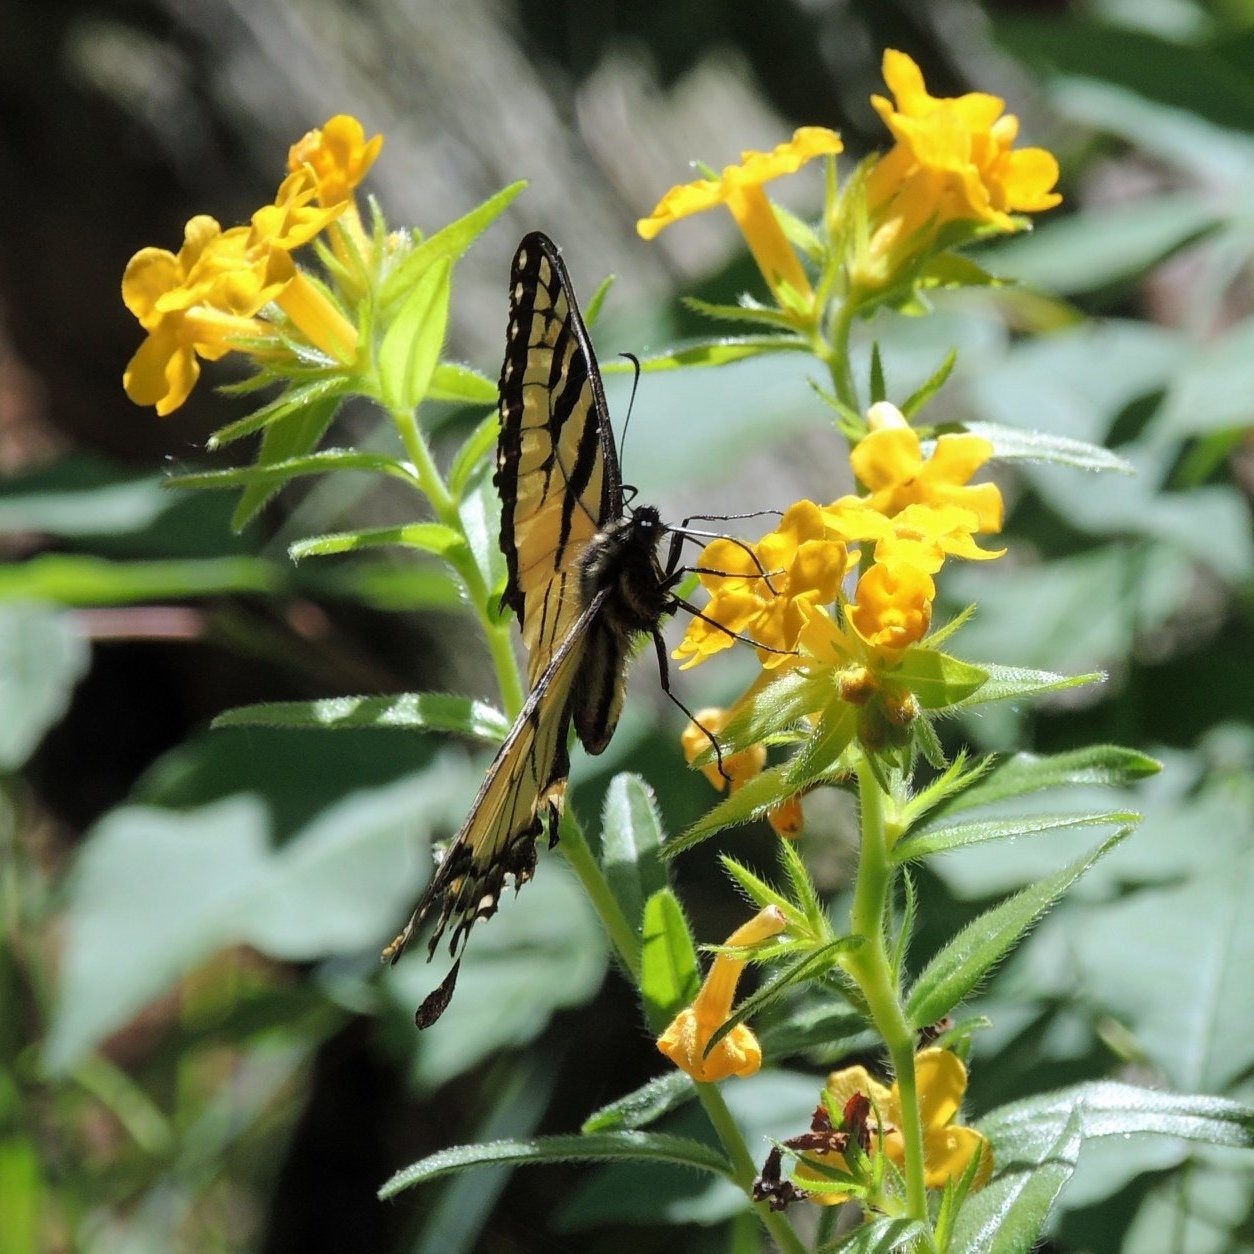 When hiking along the park trails, you don't have to go far to discover nature at work. Just like this butterfly taking the time to check out these vibrant flowers. 